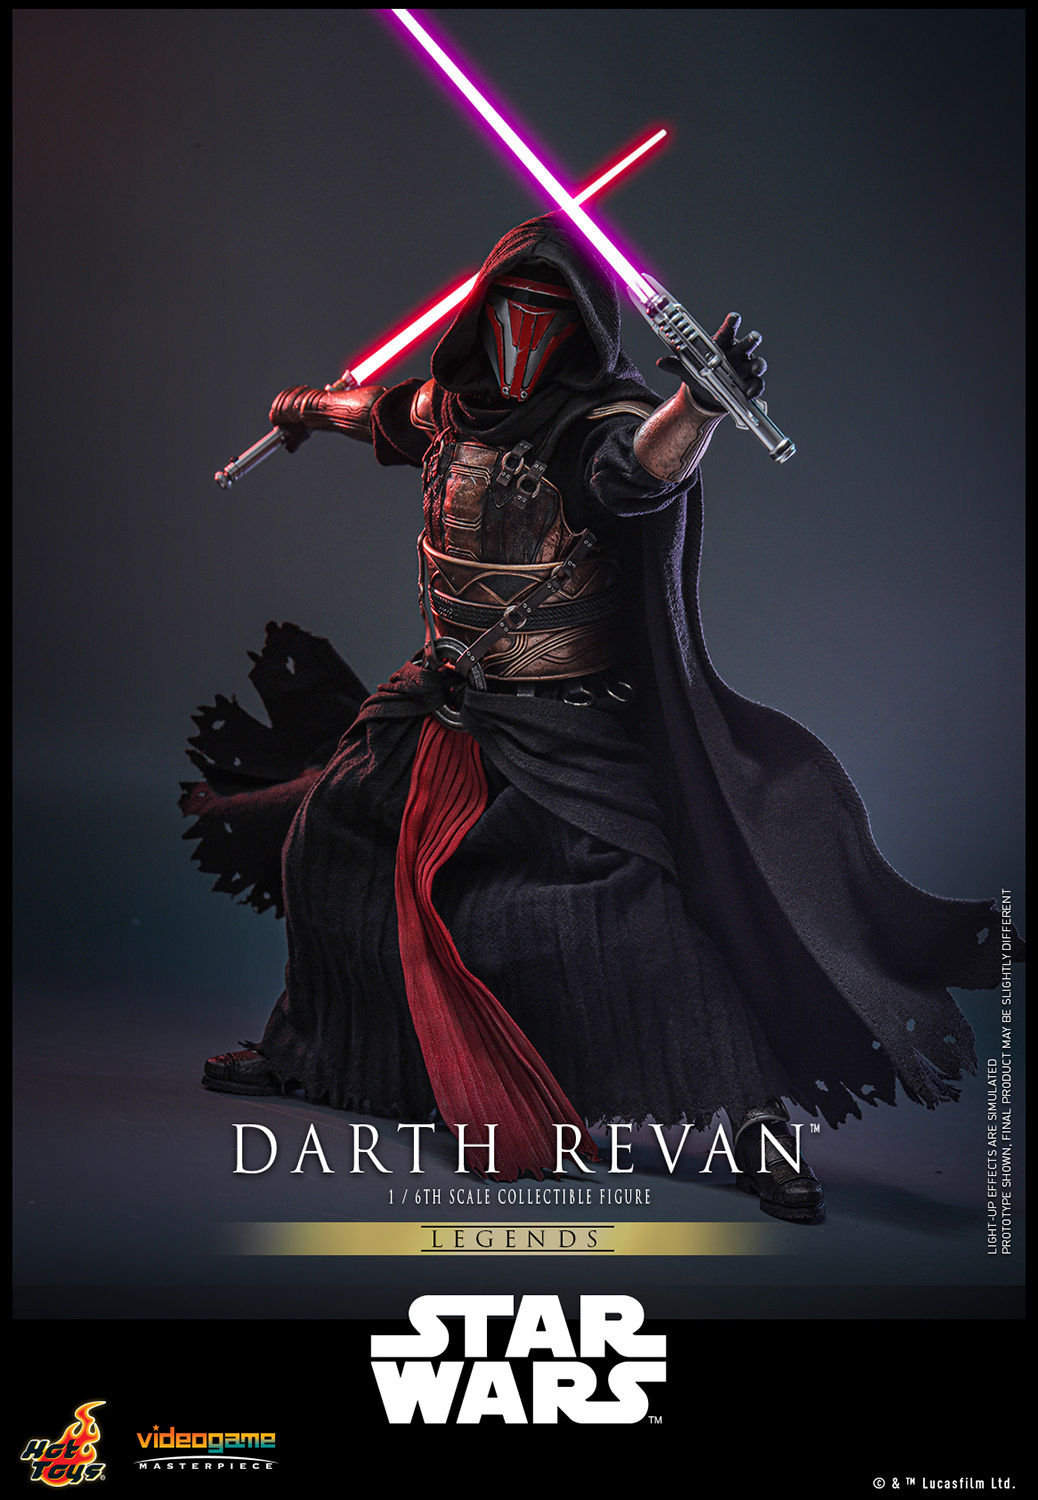 Pre-Order Hot Toys Star Wars Dartth Revan Sixth Scale Figure VGM62